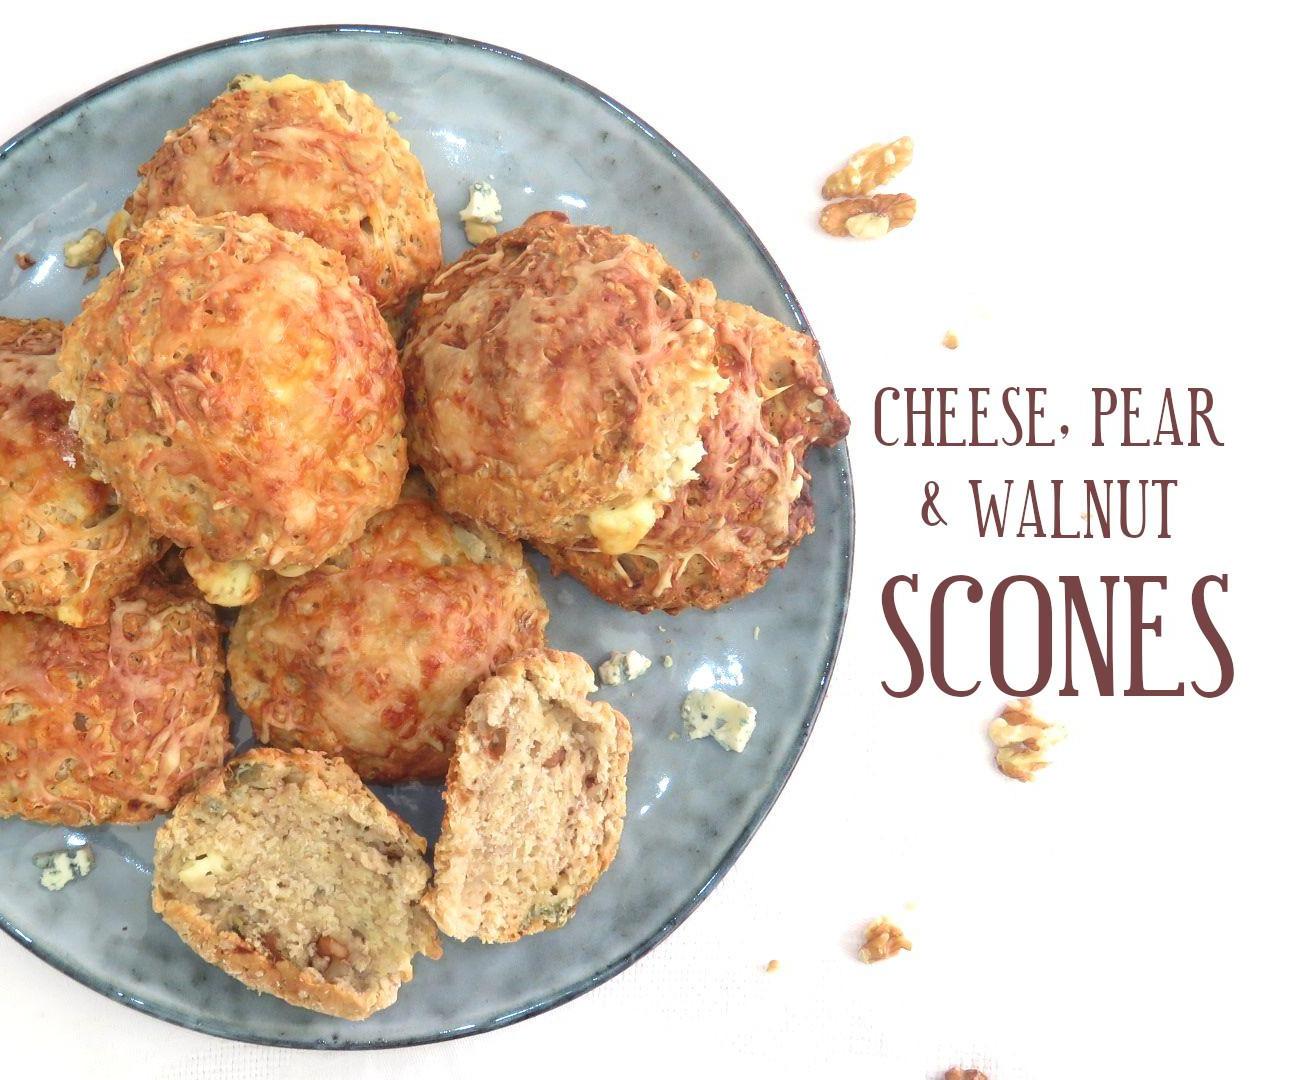 Blue Cheese, Pear and Walnut Scones